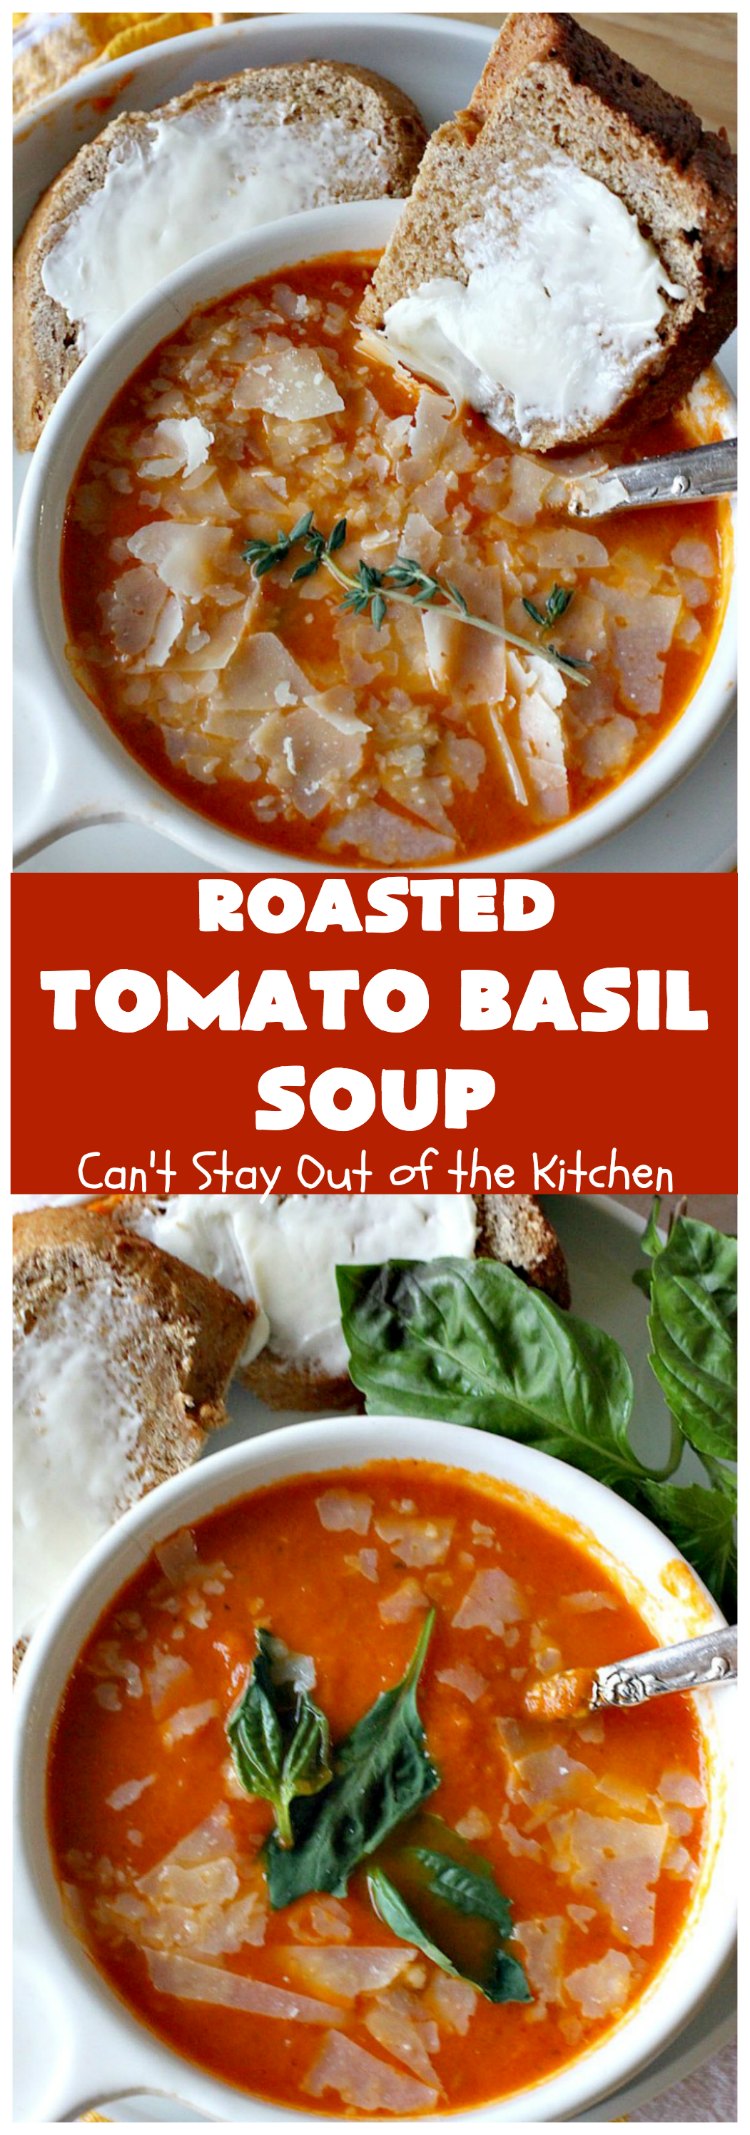 Roasted Tomato Basil Soup | Can't Stay Out of the Kitchen